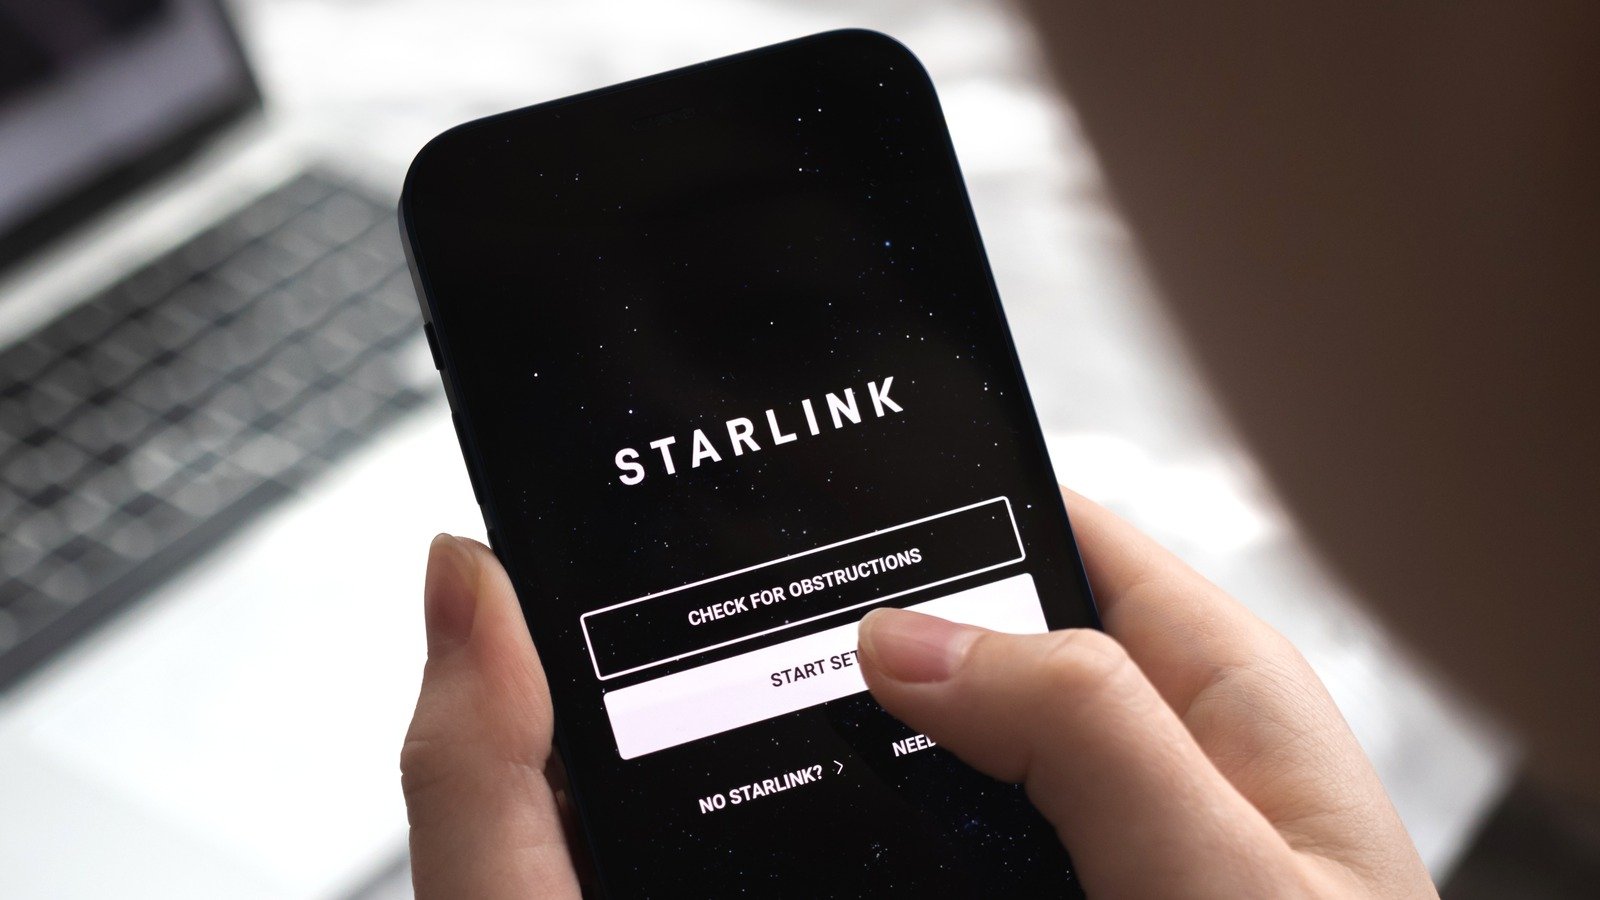 Amid The Twitter Chaos, Starlink Quietly Added A Daylight hours Records Cap